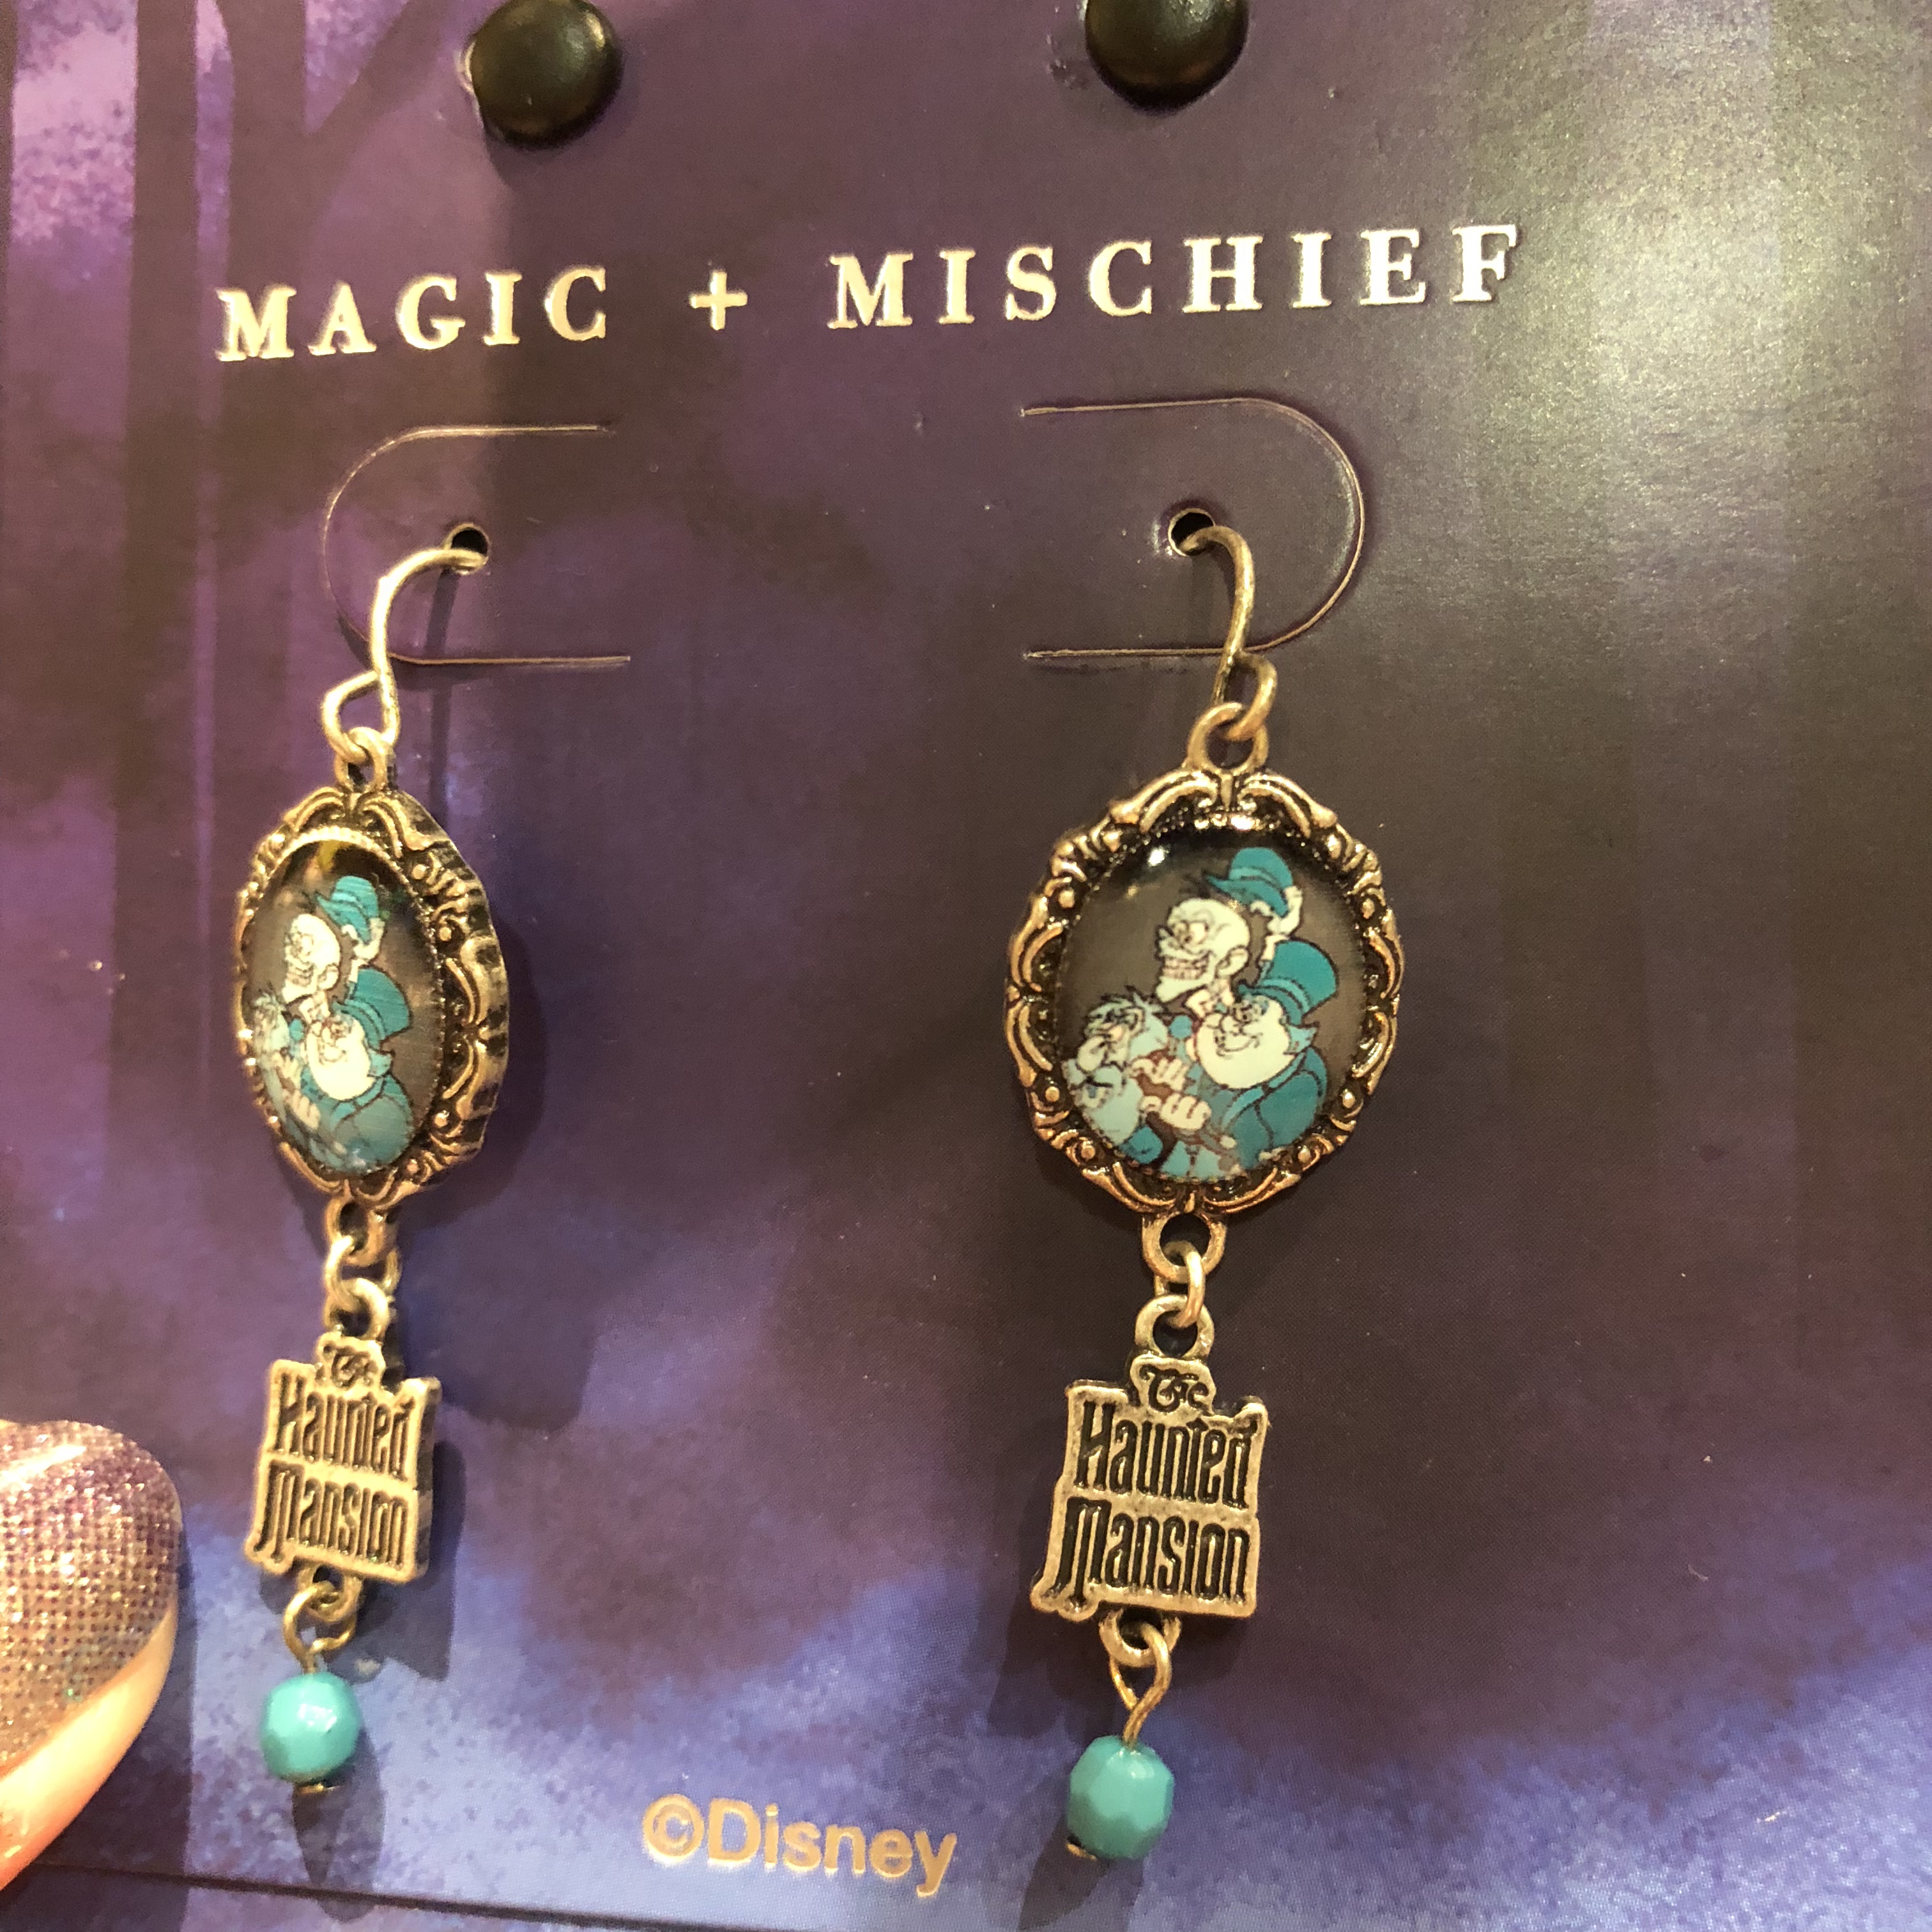 New Jewelry Collection Debuts at World of Disney